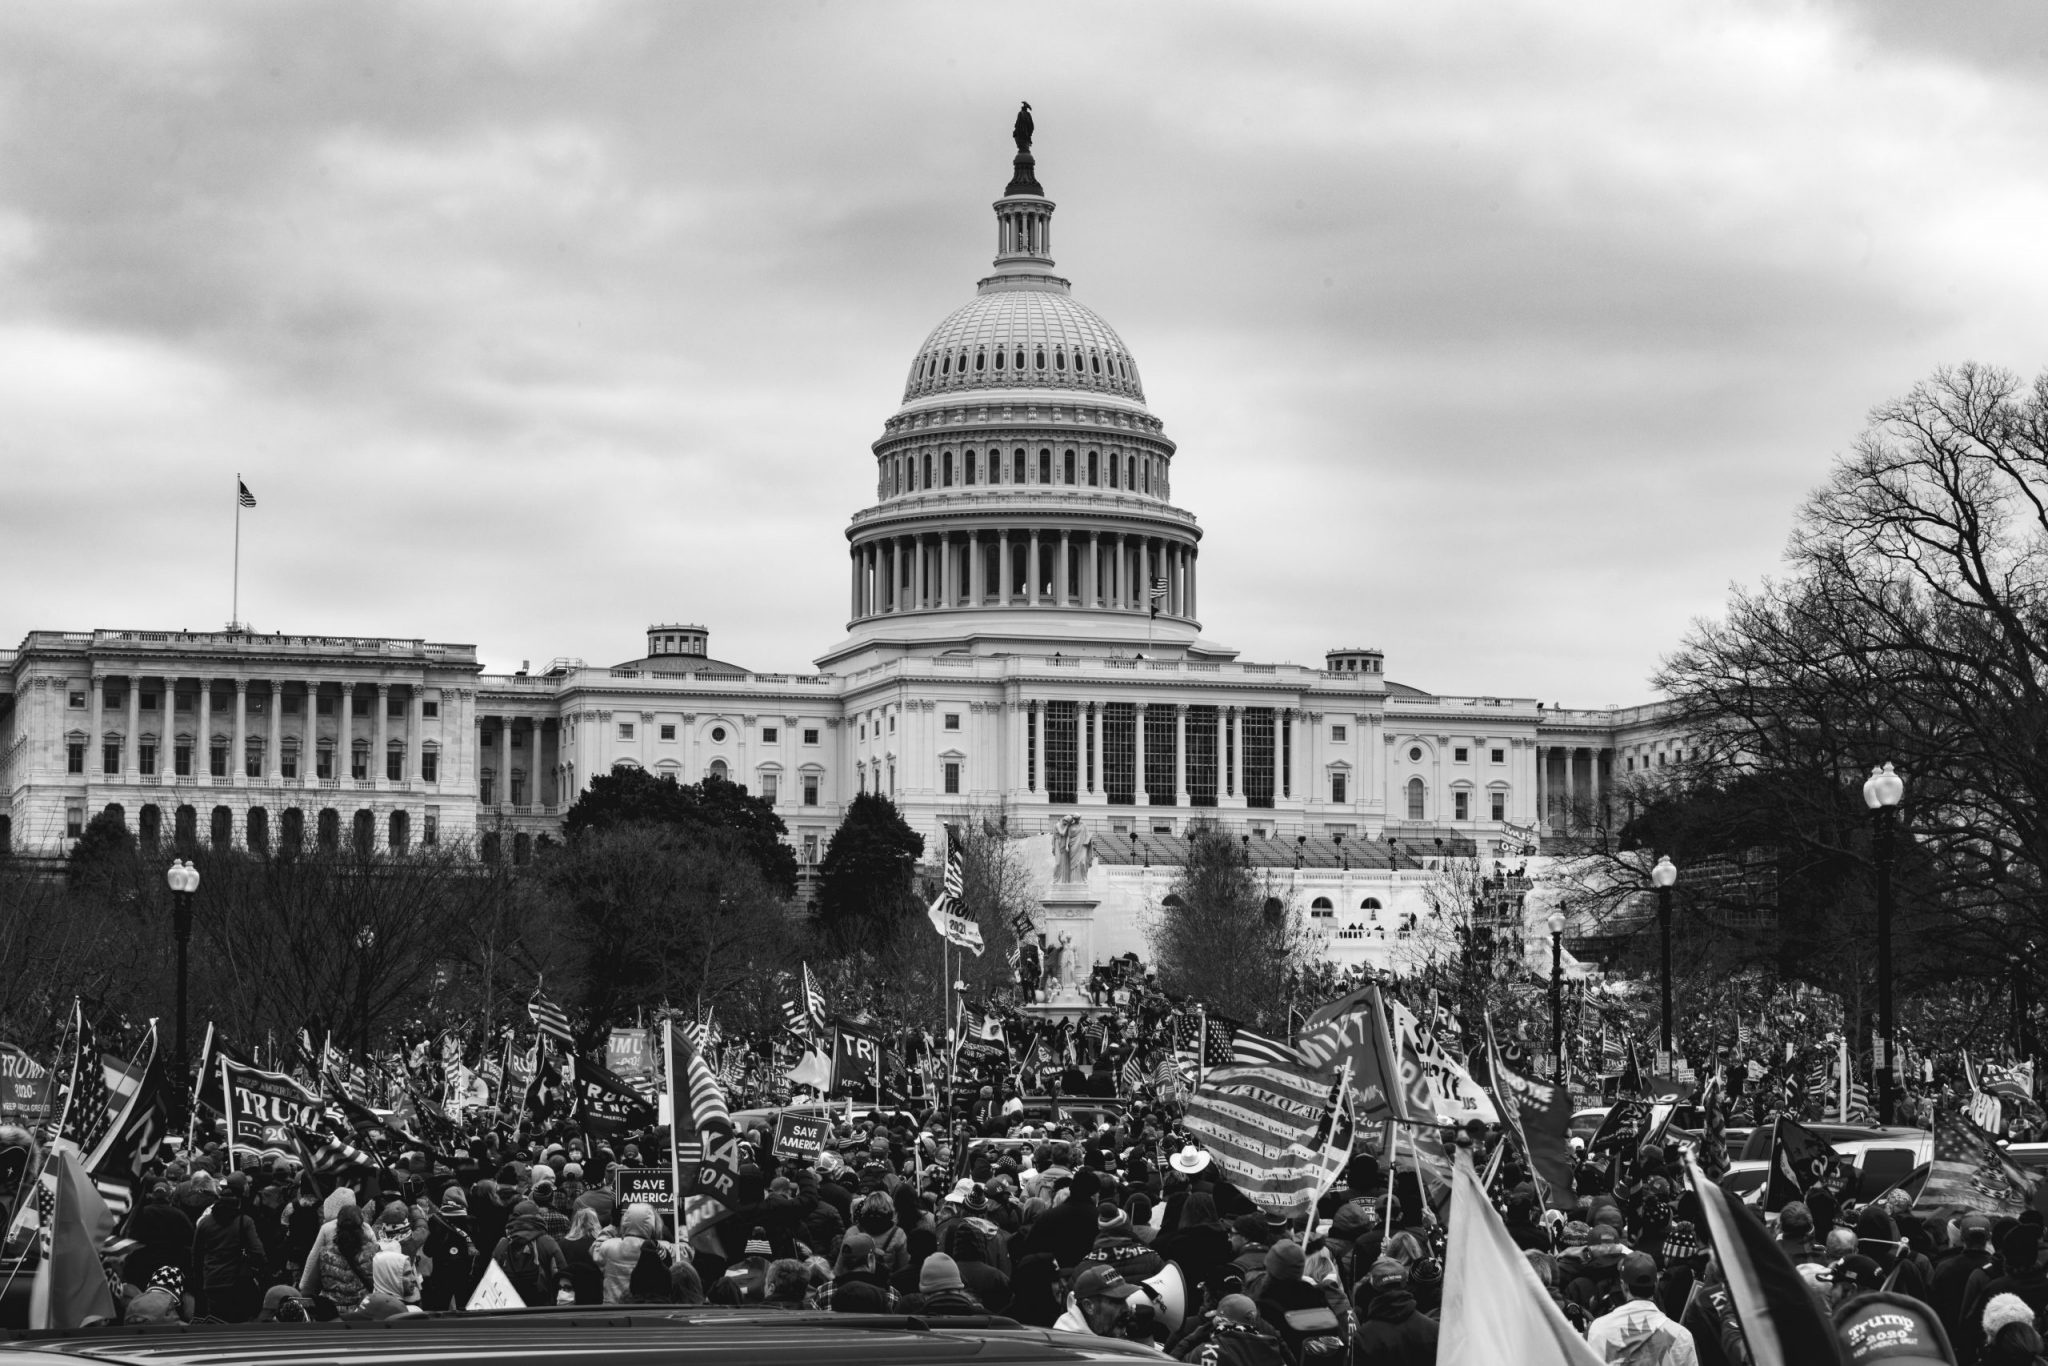 Crowds in front of the U.S. Capitol on January 6, 2021